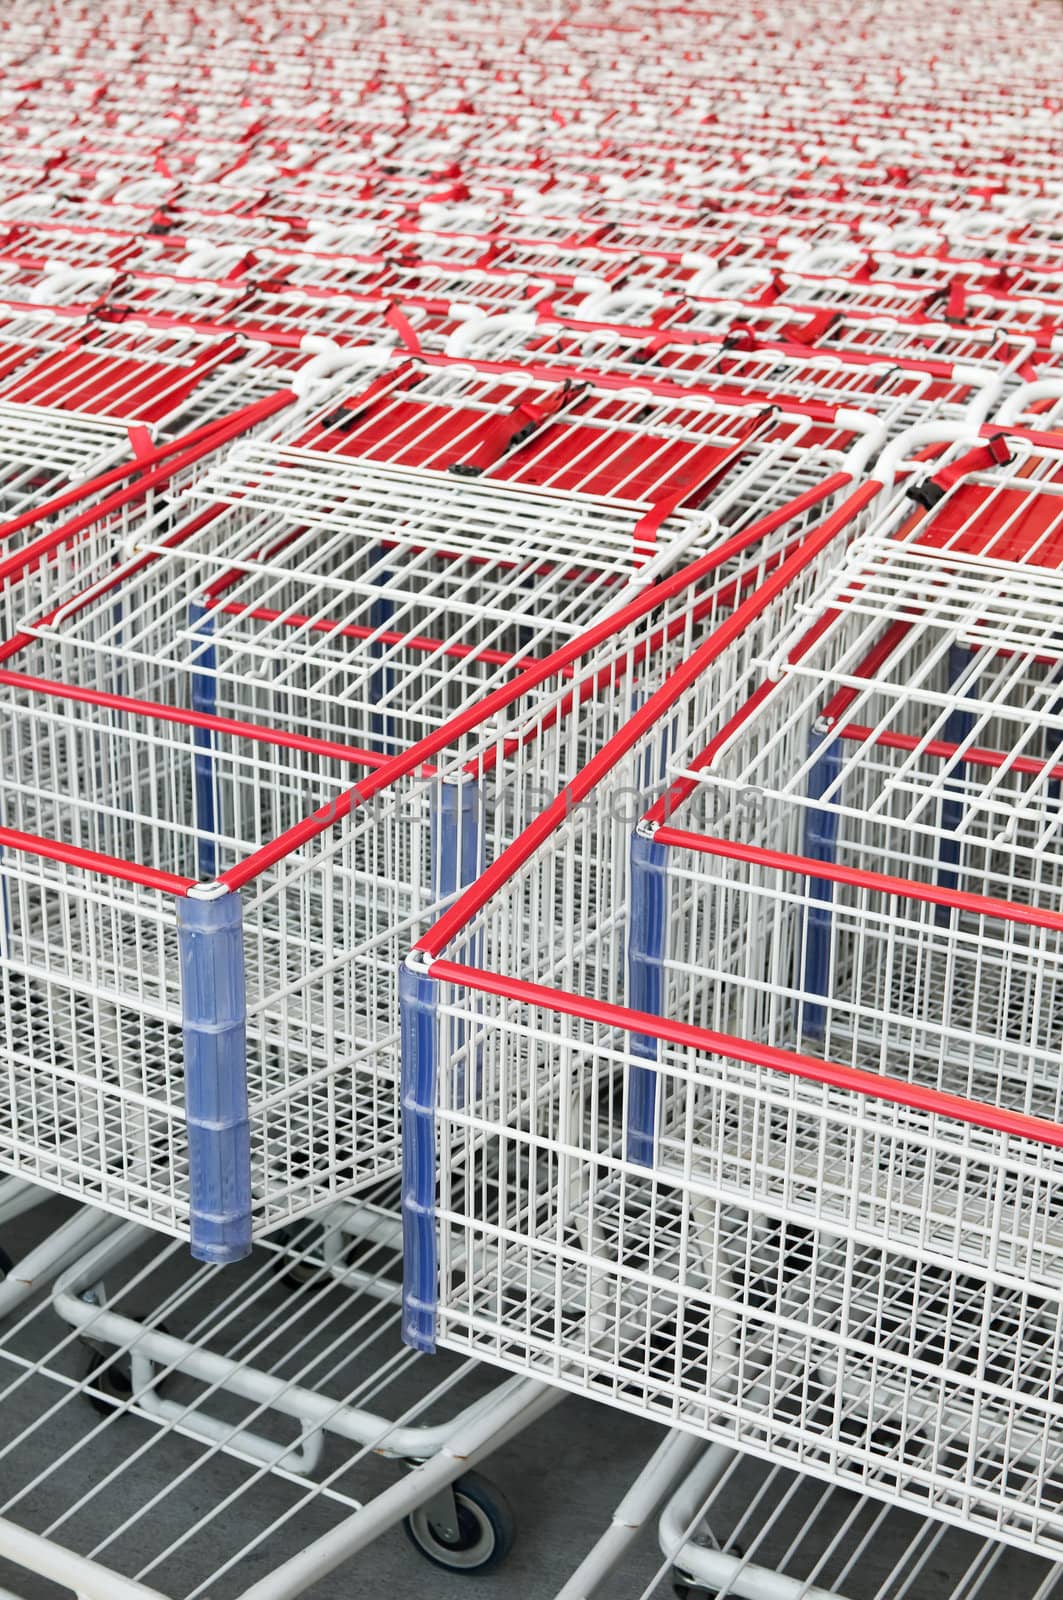 American shopping carts that are stacked together.